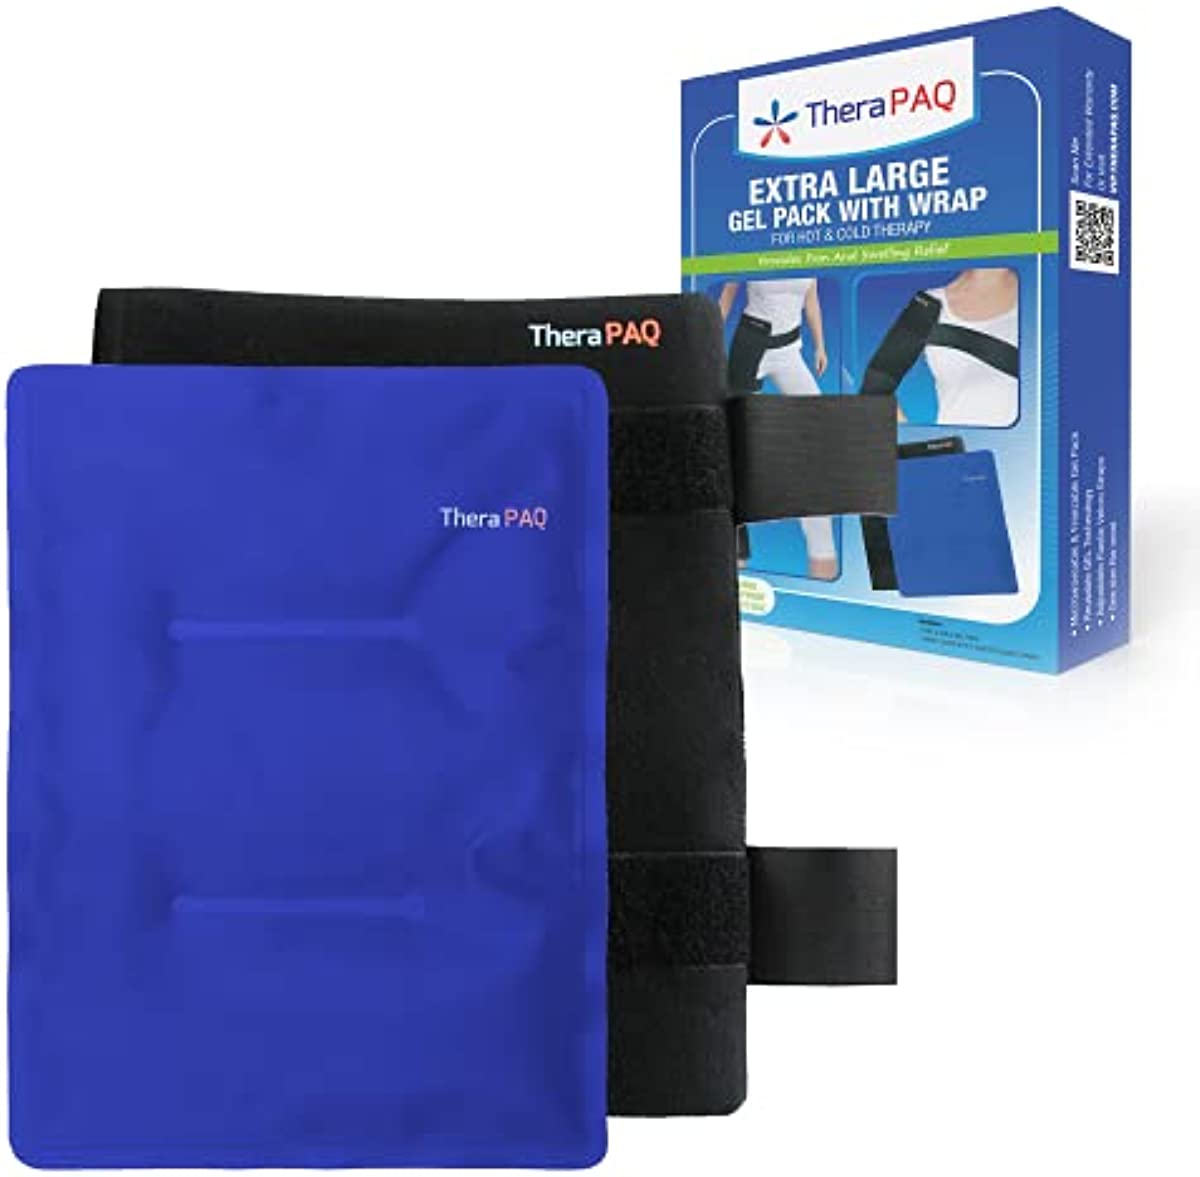 TheraPAQ Ice Packs for Injuries Reusable Version - Adjustable, Large 14 x 11 Inch Hot and Cold Gel Pack w/Adjustable Strap for Hip, Shoulder, Knee and Back Discomfort - Sports Therapy and Recovery